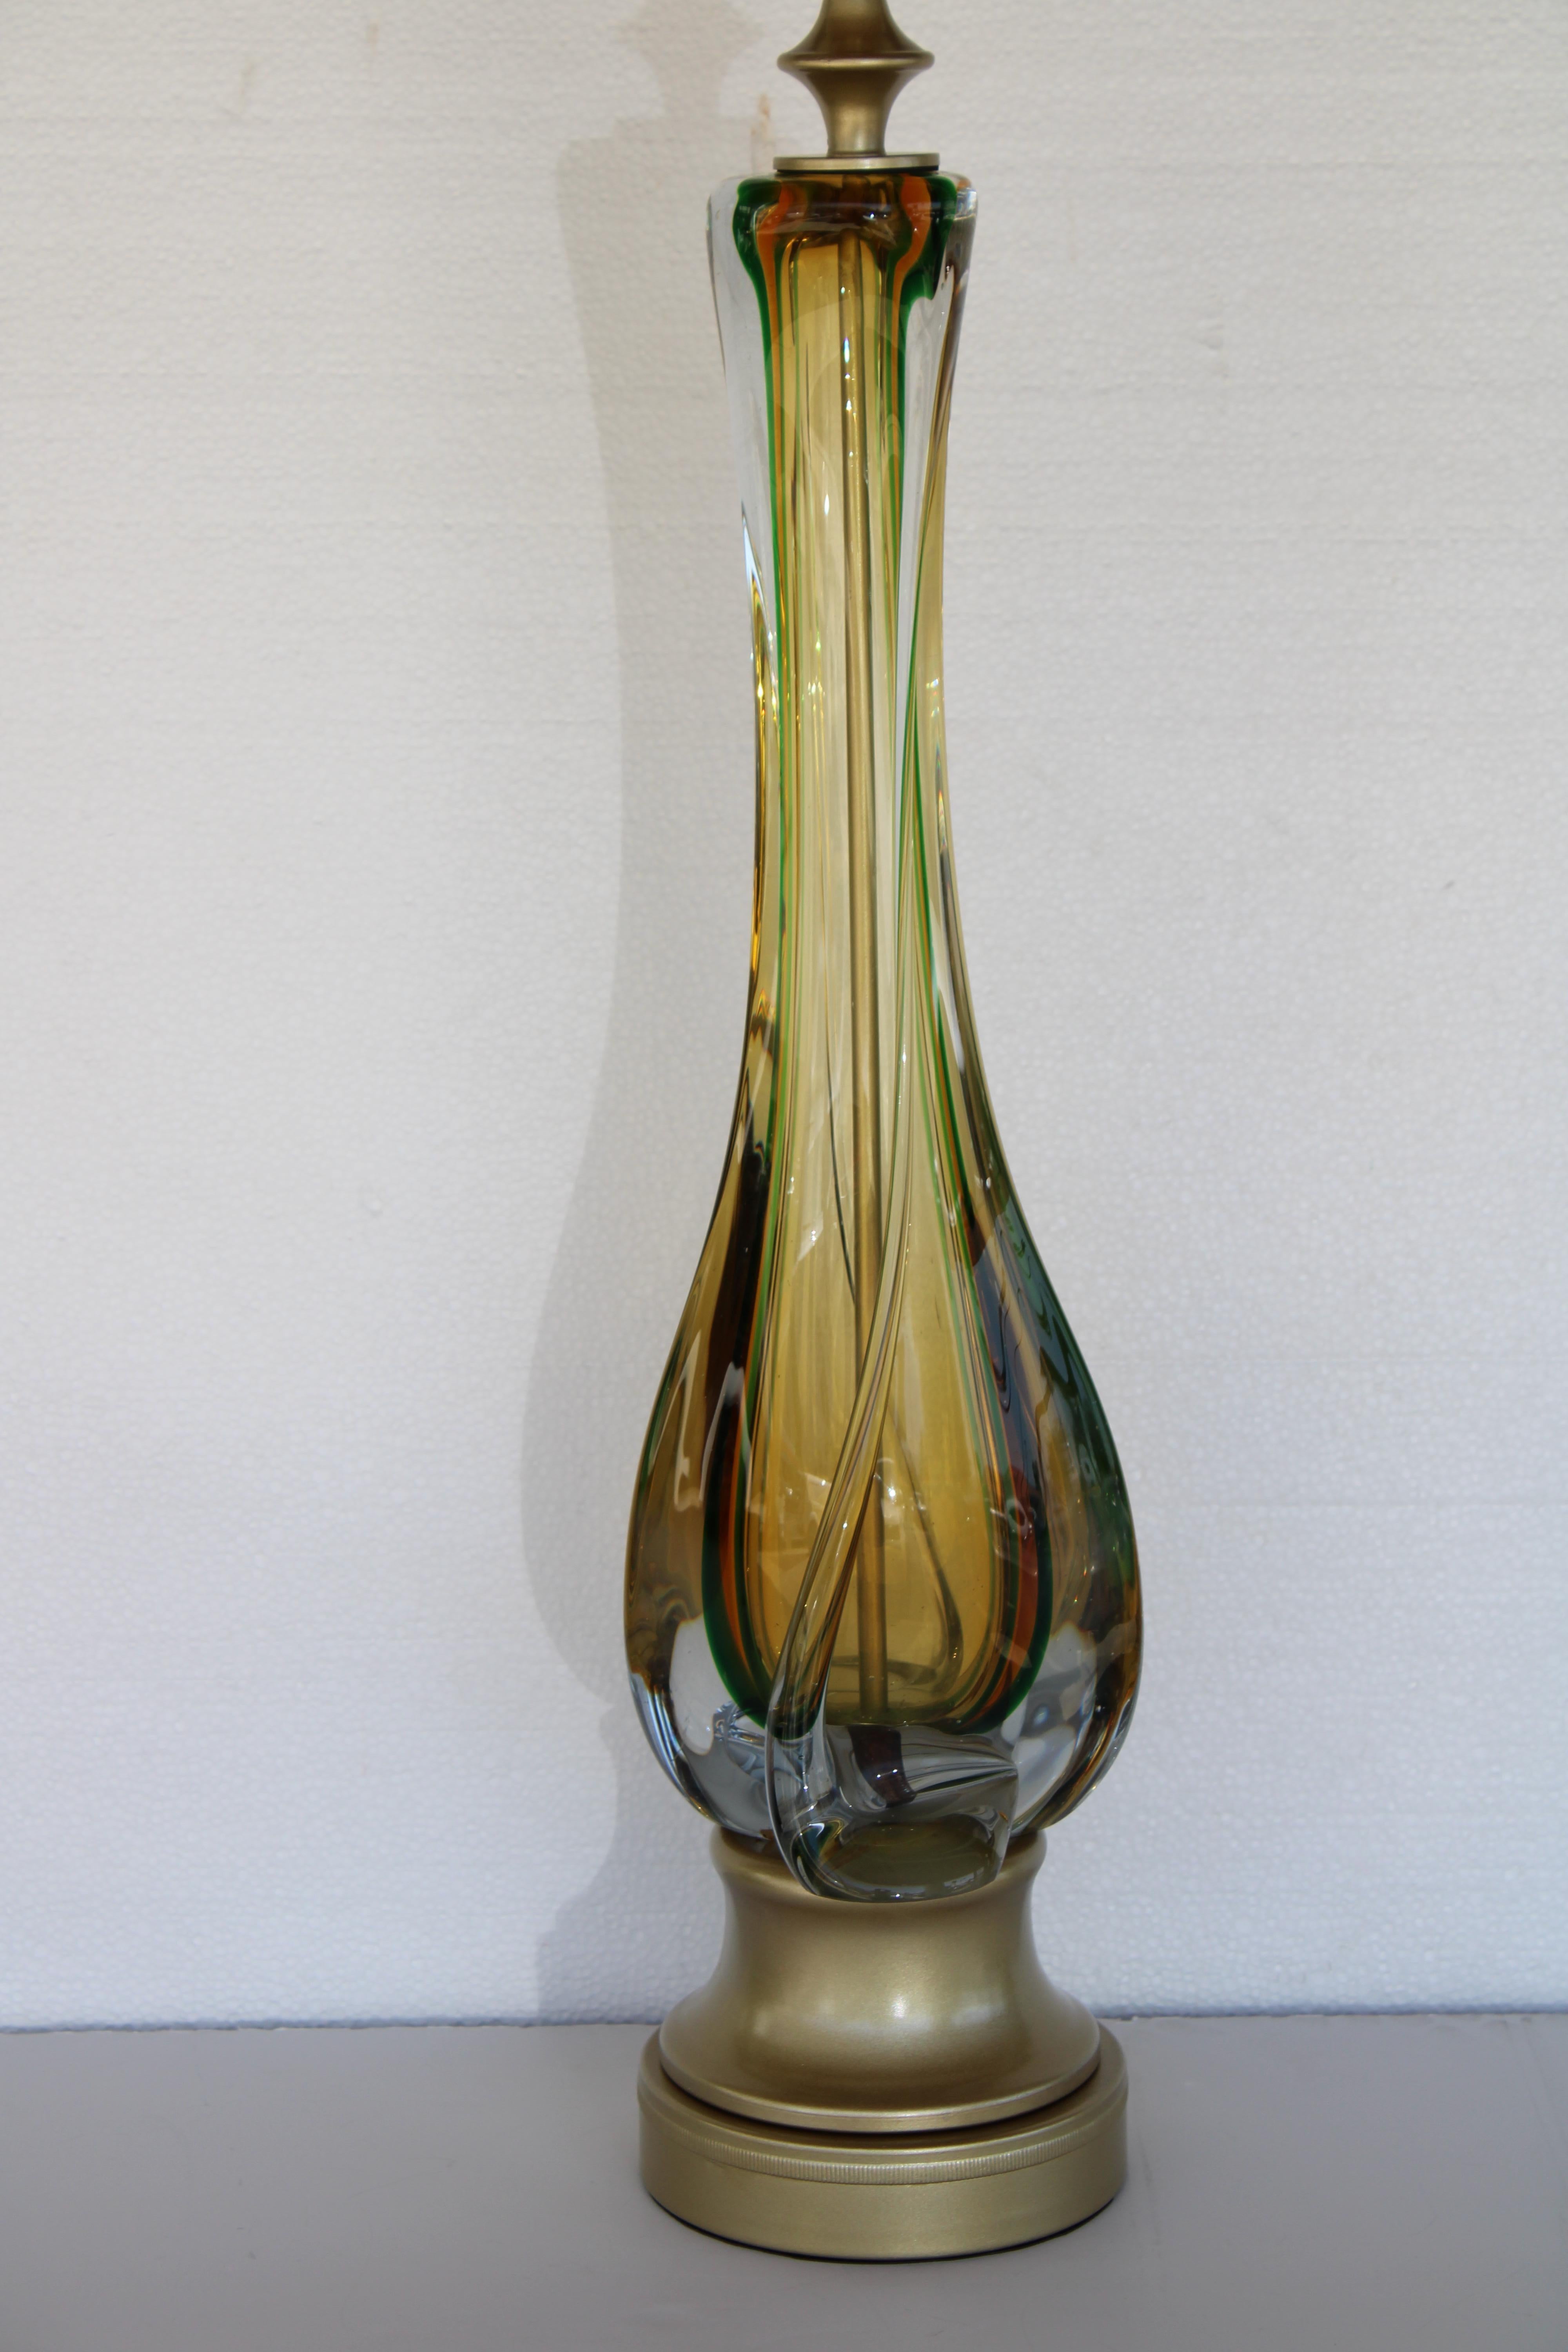 Elegant Murano glass lamp with various shades of green, orange and yellow. Glass portion is 21.5